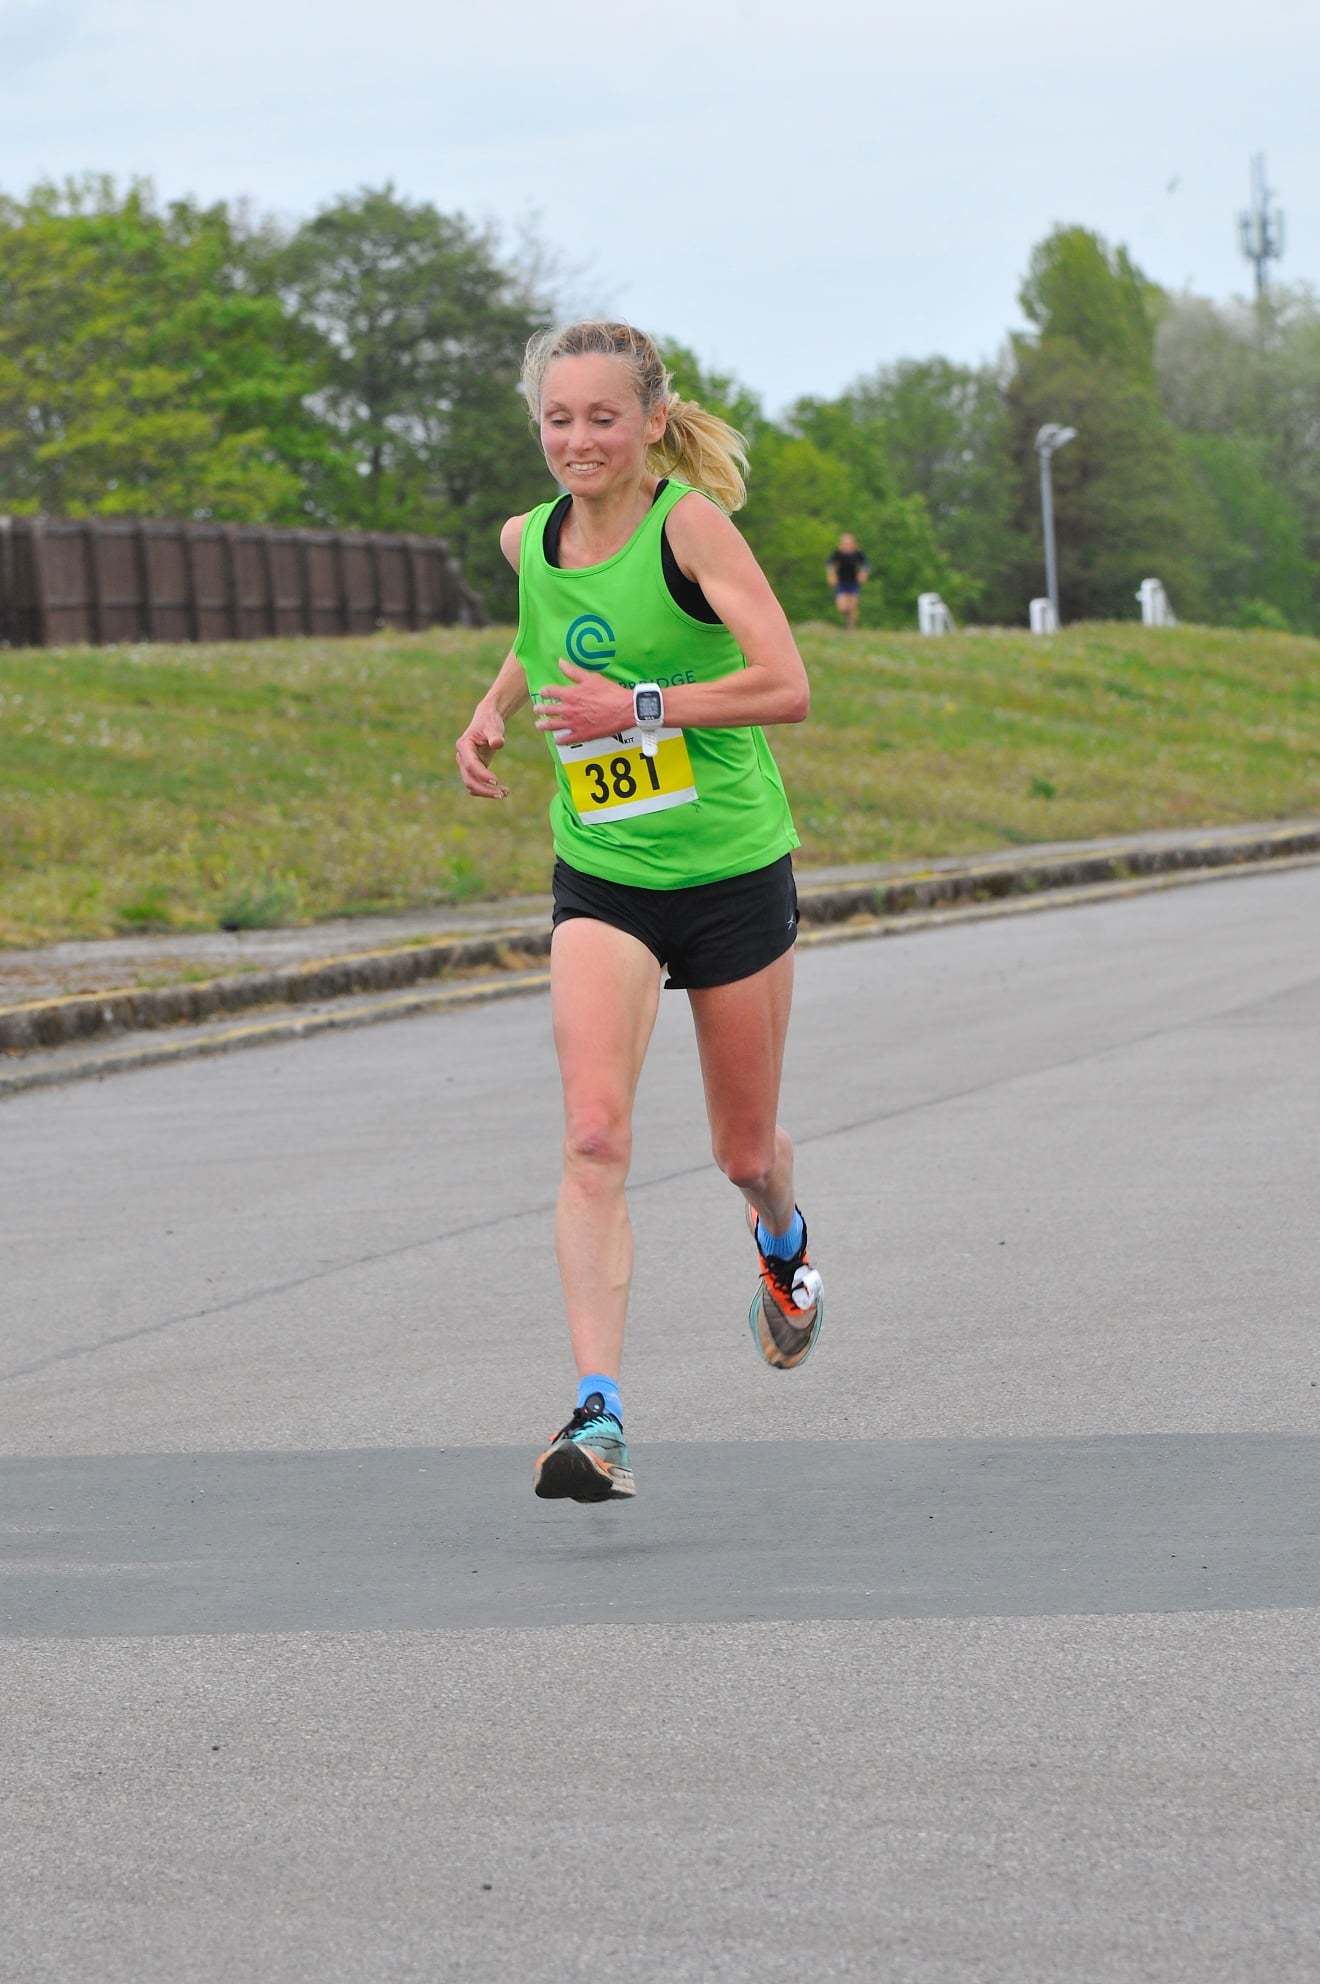 Sarah, pictured, has represented the country in running events and so far, three of her children have earned national vests